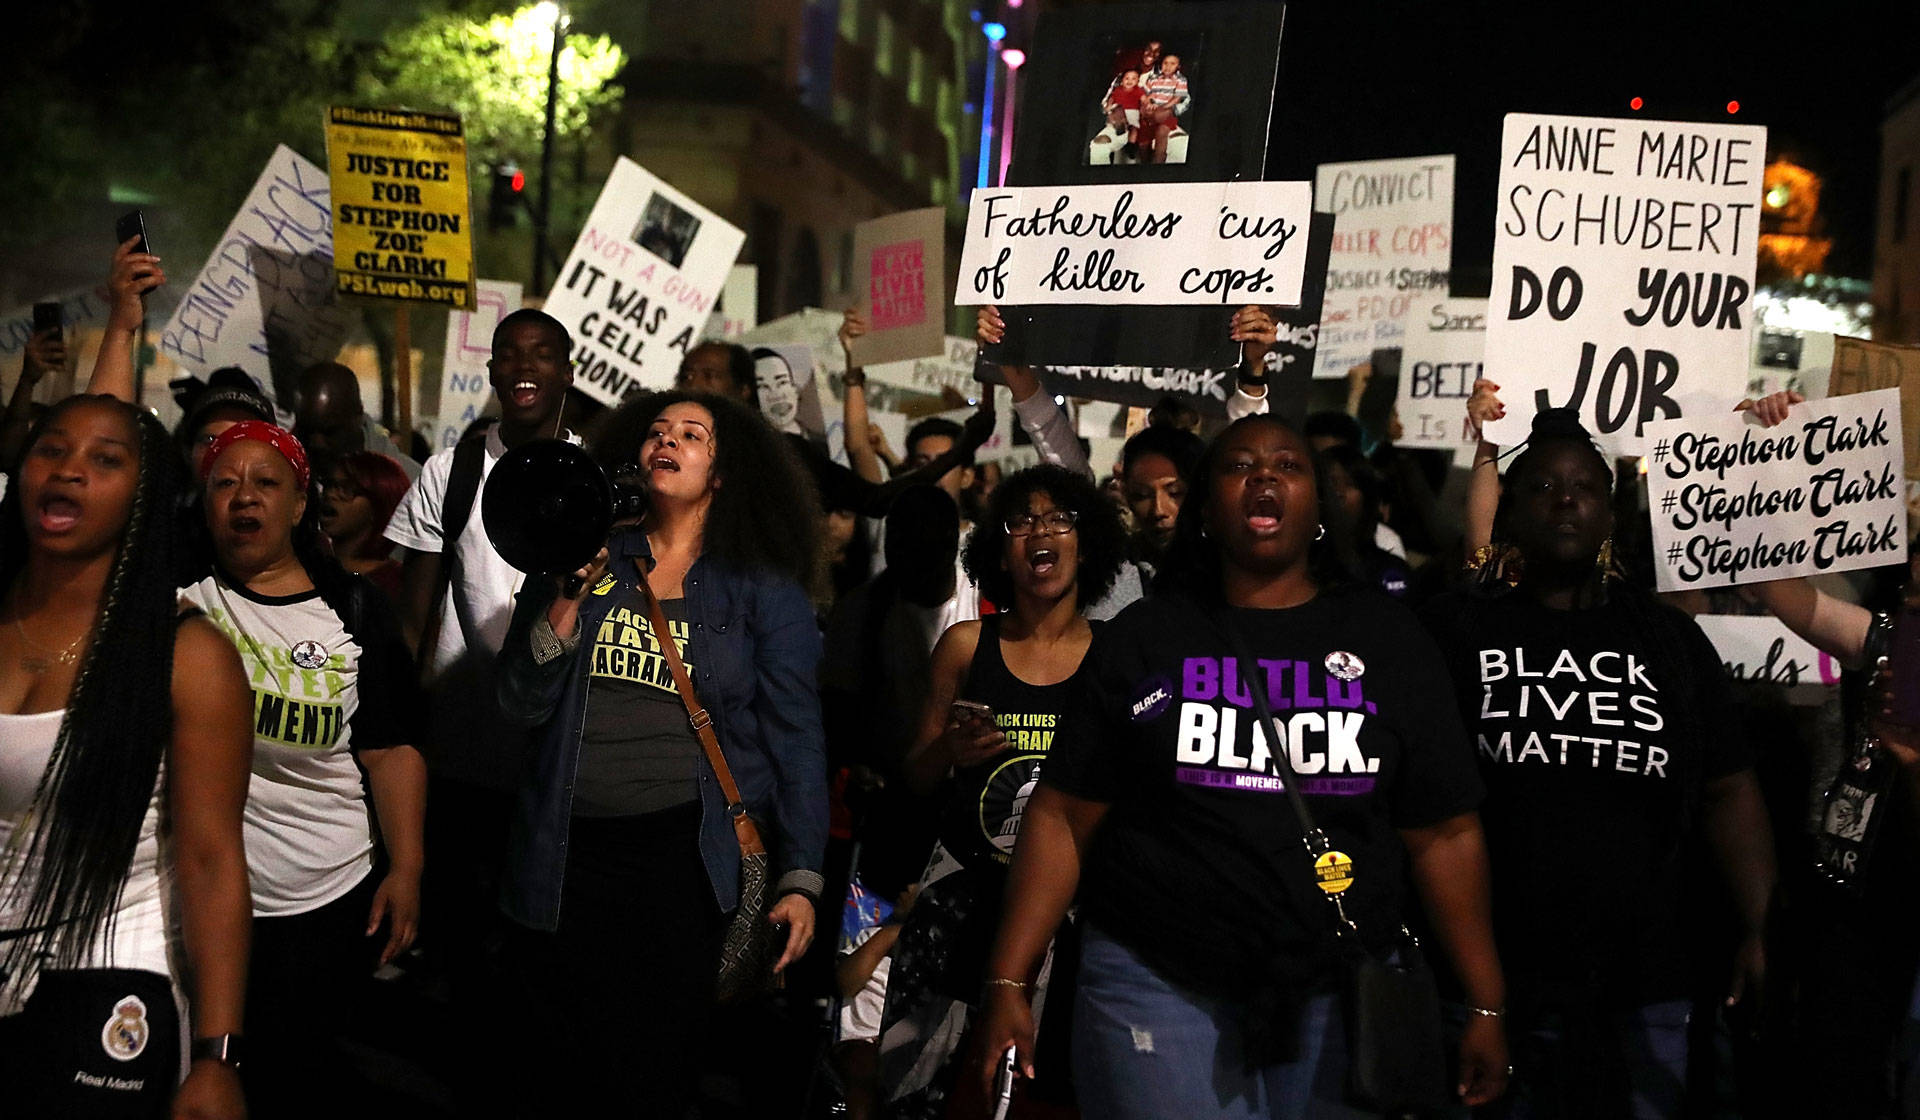 Black Lives Matter protesters march through the streets of Sacramento during a demonstration on March 30, 2018, one day after Stephon Clark's funeral. Justin Sullivan/Getty Images